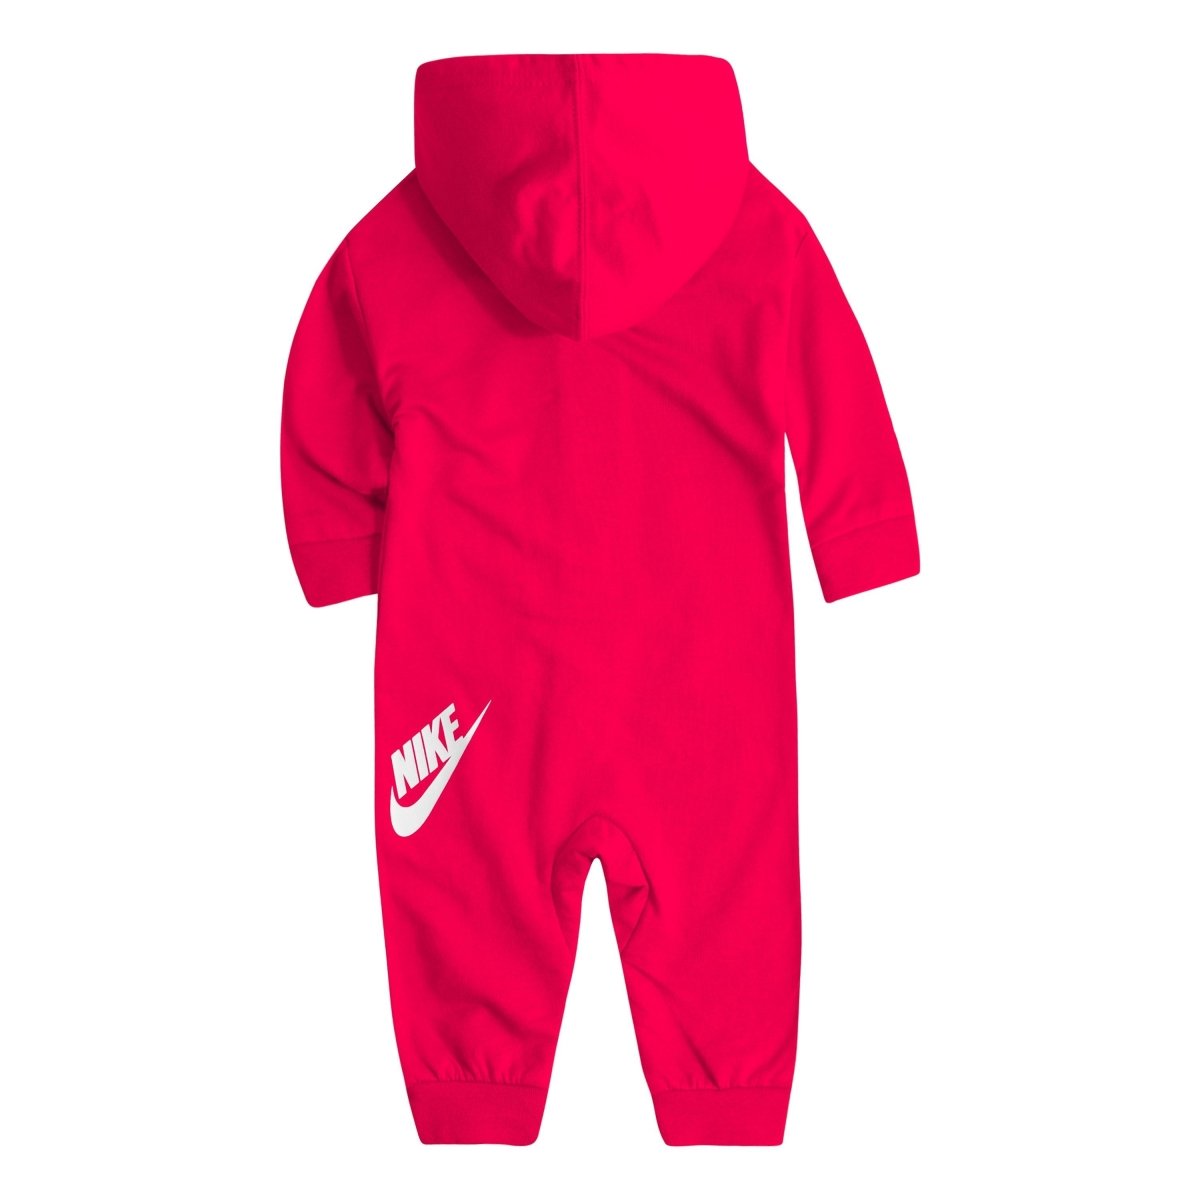 Nike NIKE INFANT'S CHEVRON PINK COVERALL ONESIE - INSPORT